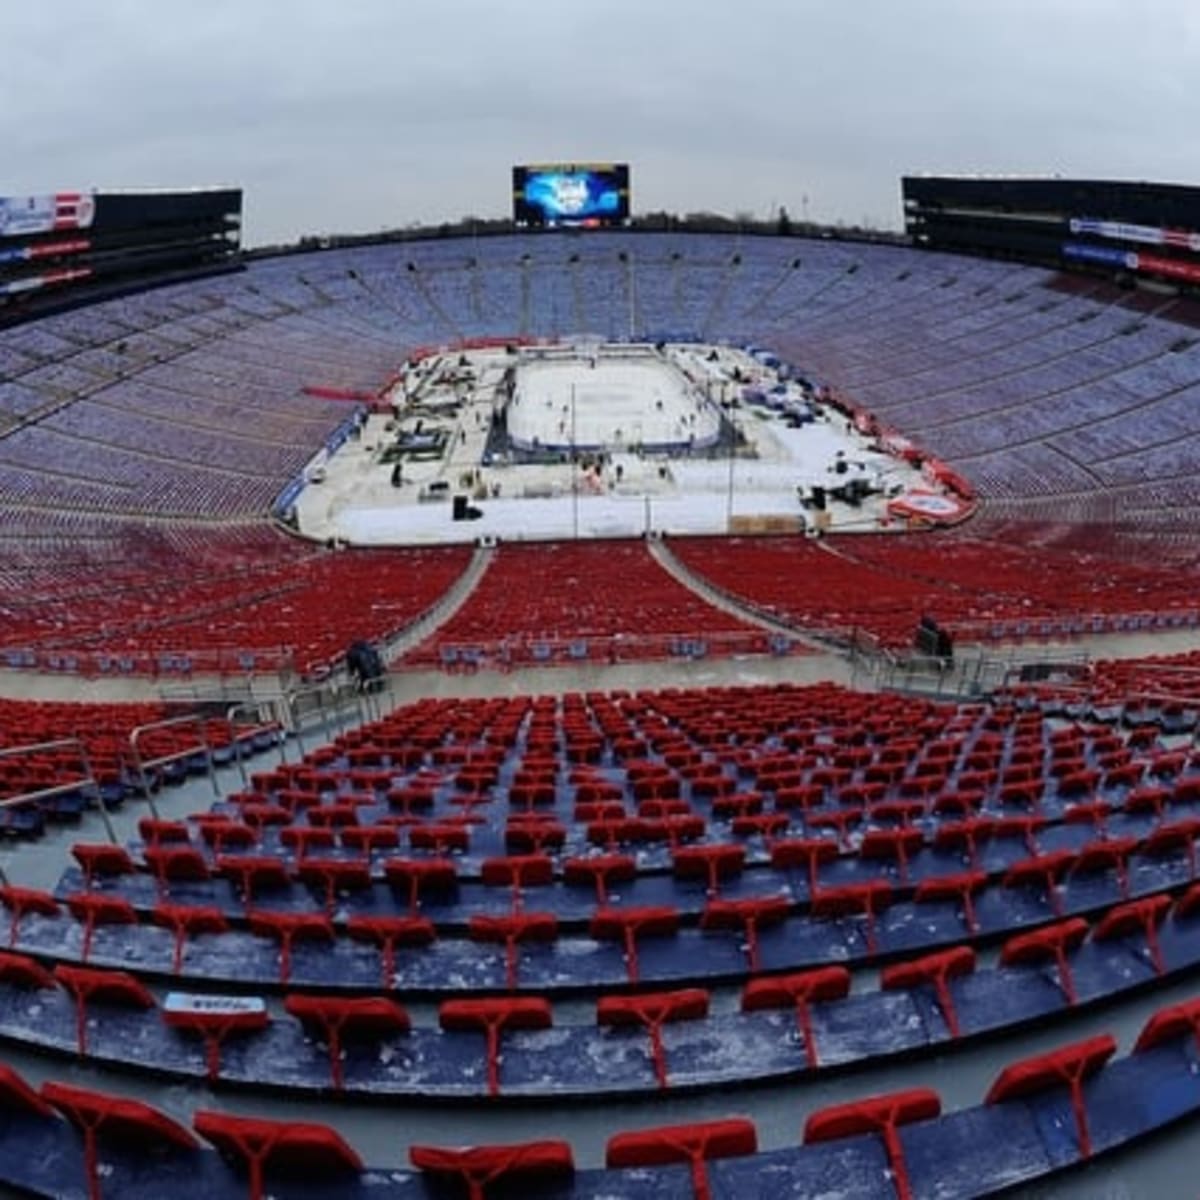 Winter Classic: Why NHL's marquee event still excites